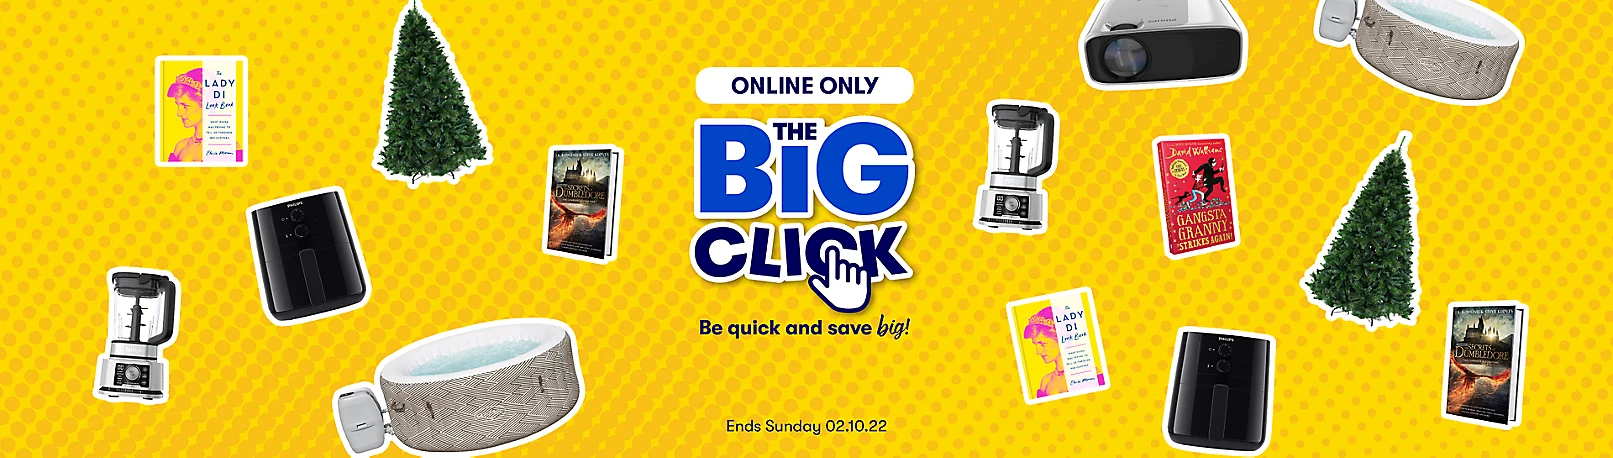 Big W Big Click - Up to 50% OFF on Books, Tech, Appliances and more